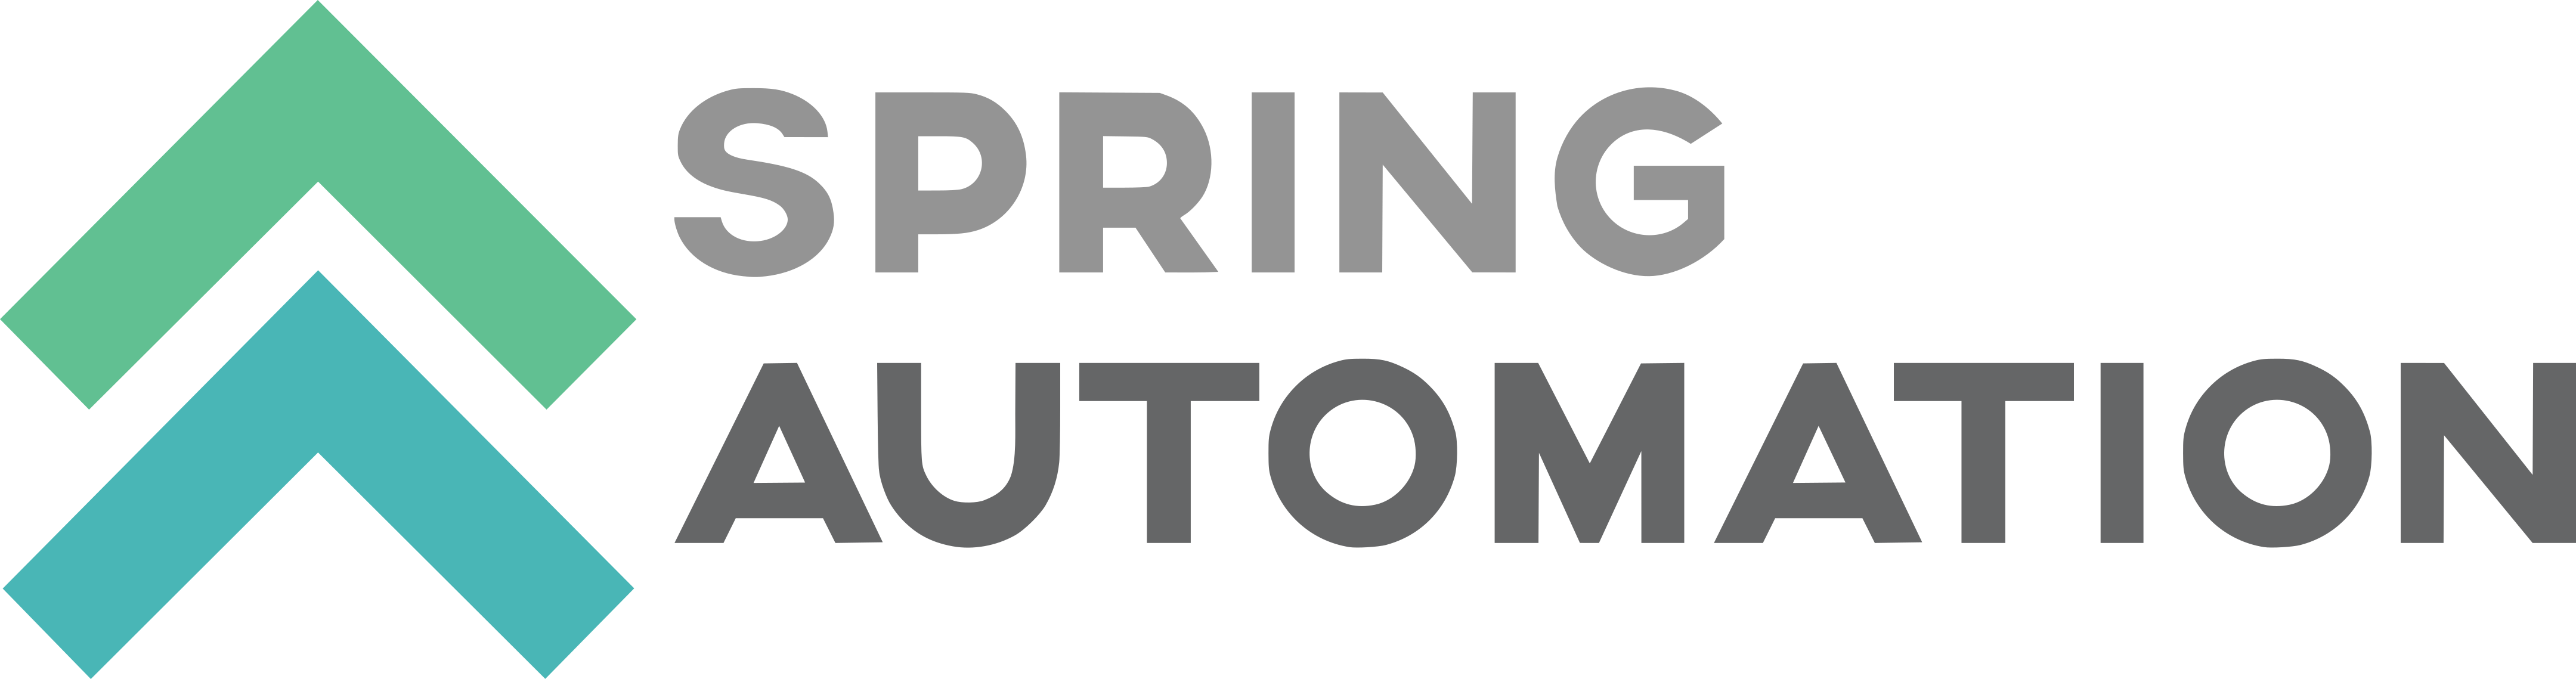 Spring Automation